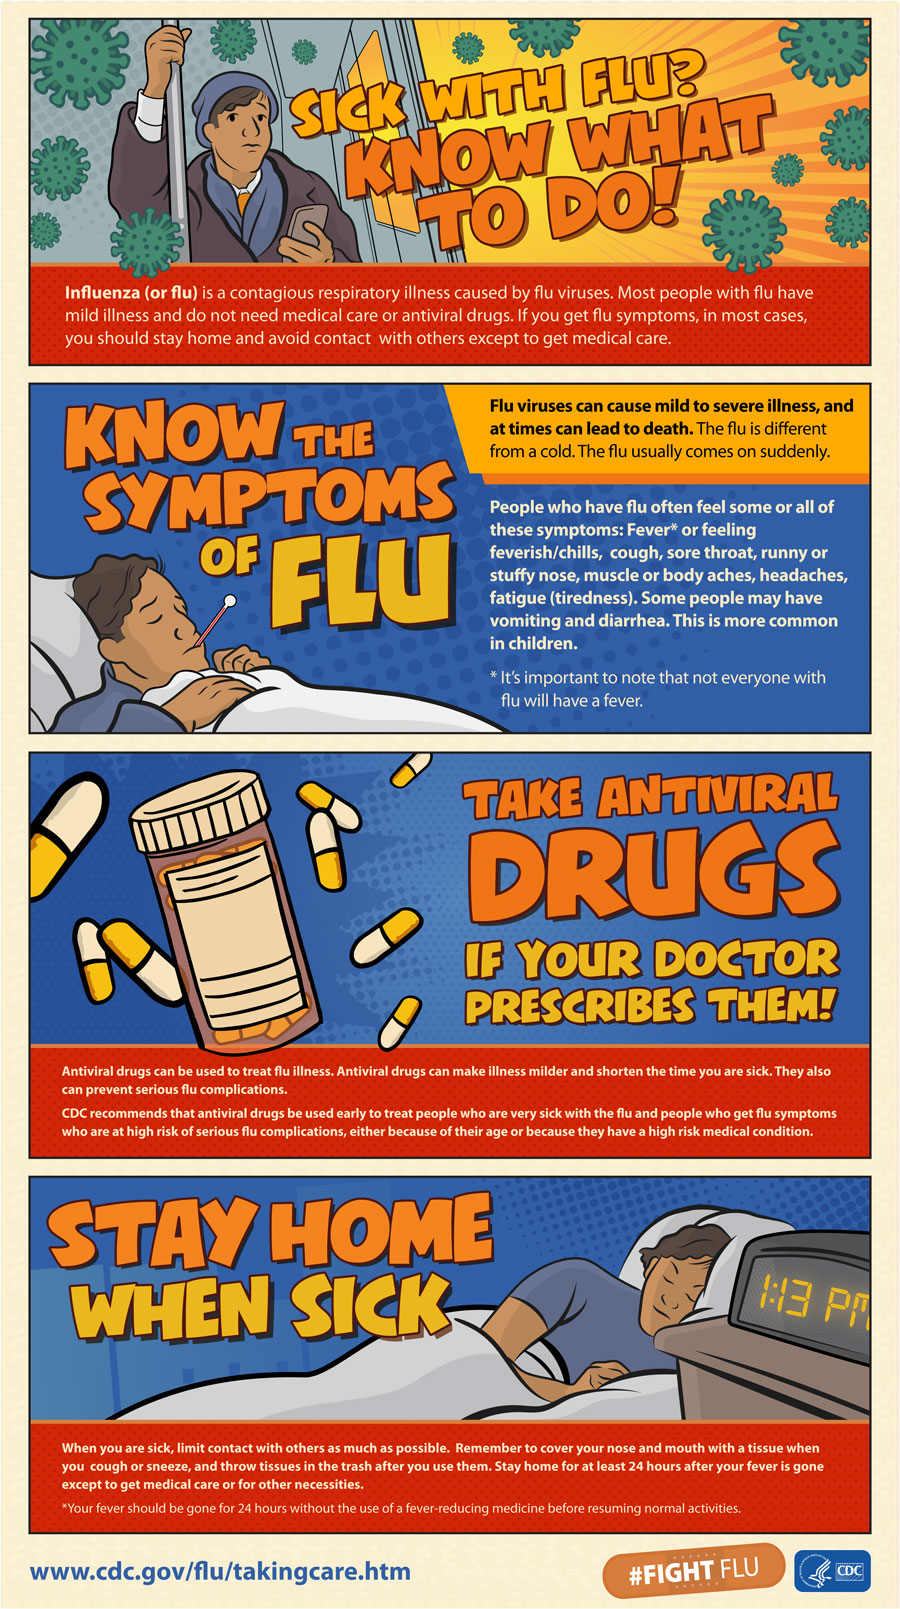 https://www.cdc.gov/flu/images/freeresources/print-large/sick-with-the-flu-large.jpg